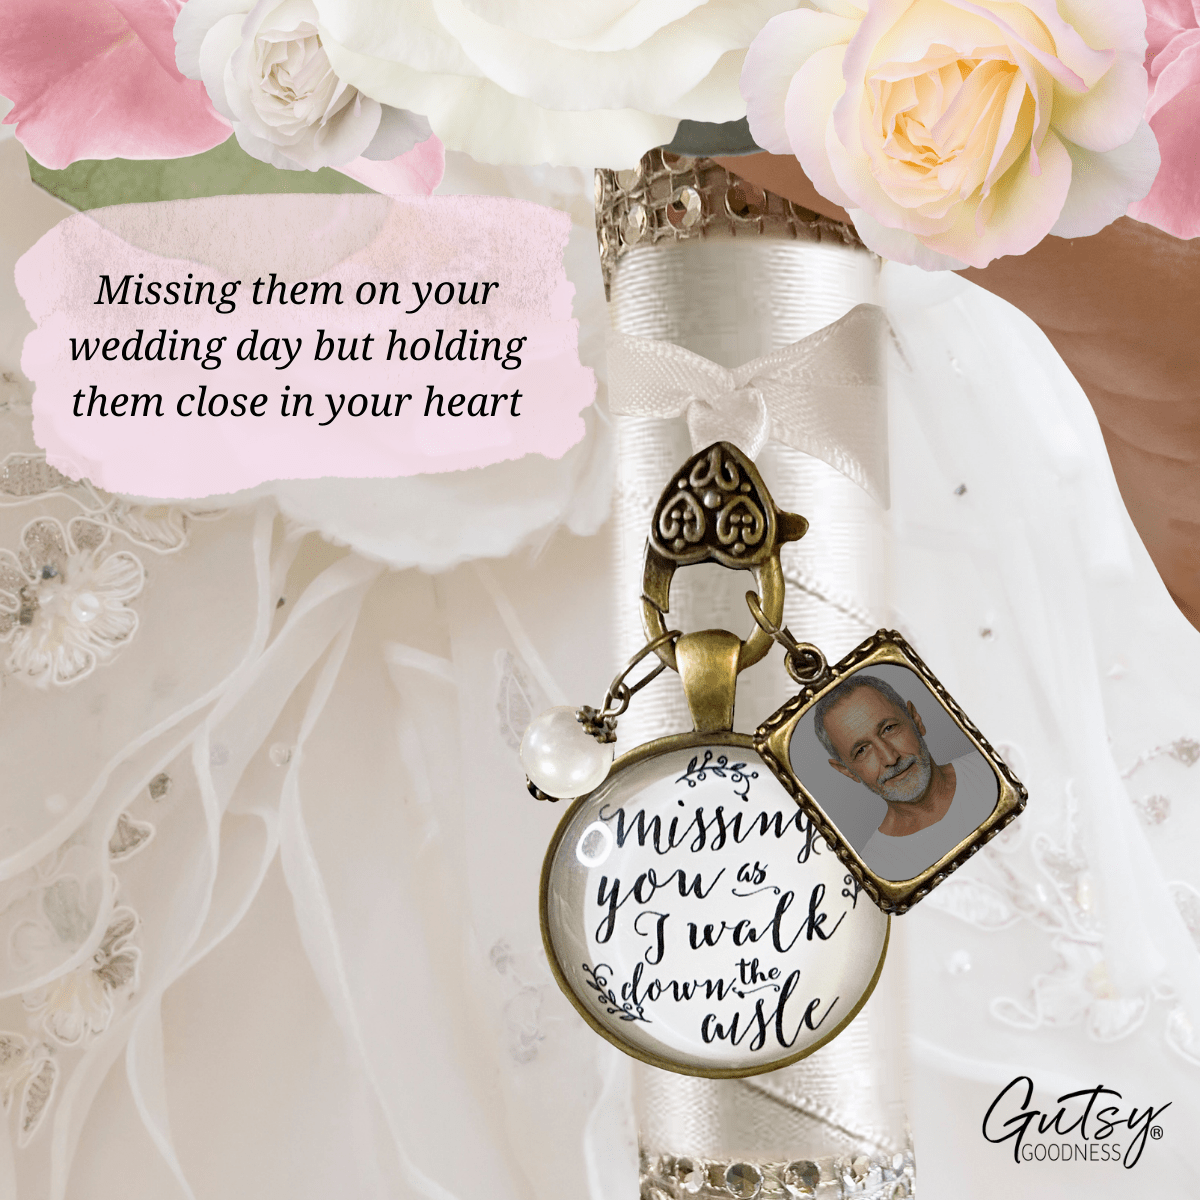 Bouquet Wedding Charm Missing You As I Walk Memorial White Bridal Photo Jewelry - Gutsy Goodness Handmade Jewelry Gifts